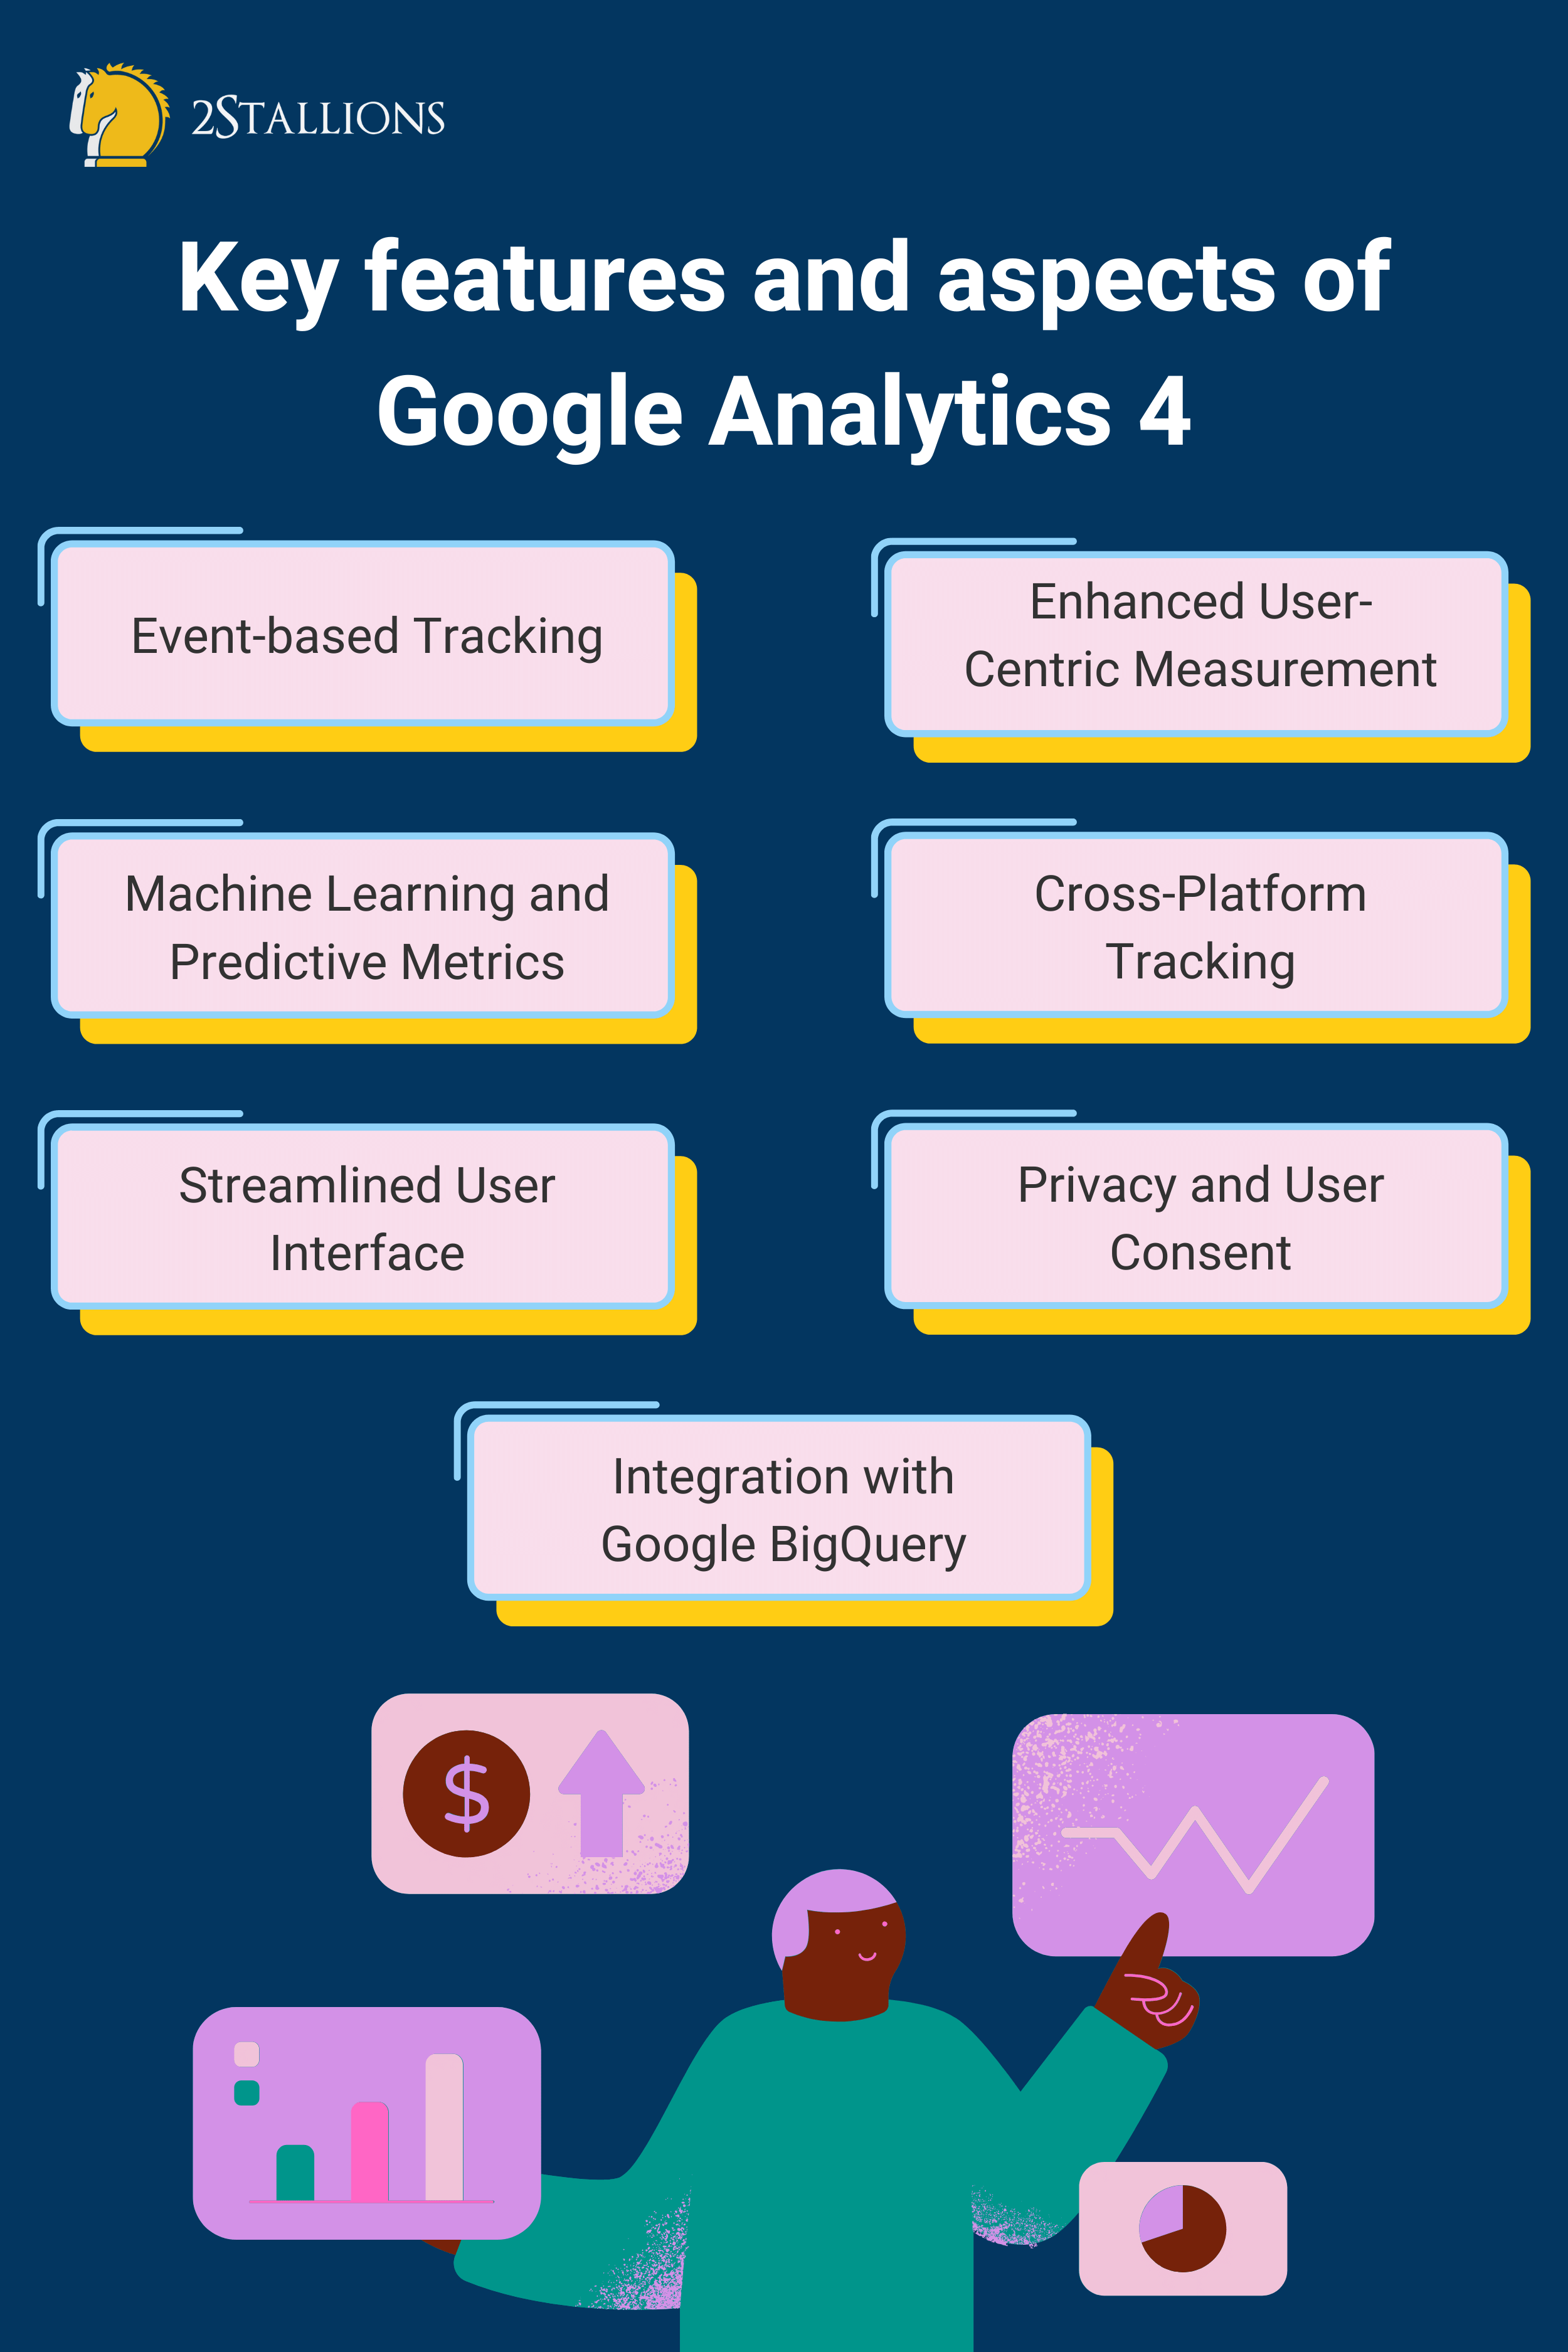 Key features and aspects of Google Analytics 4 | 2Stallions